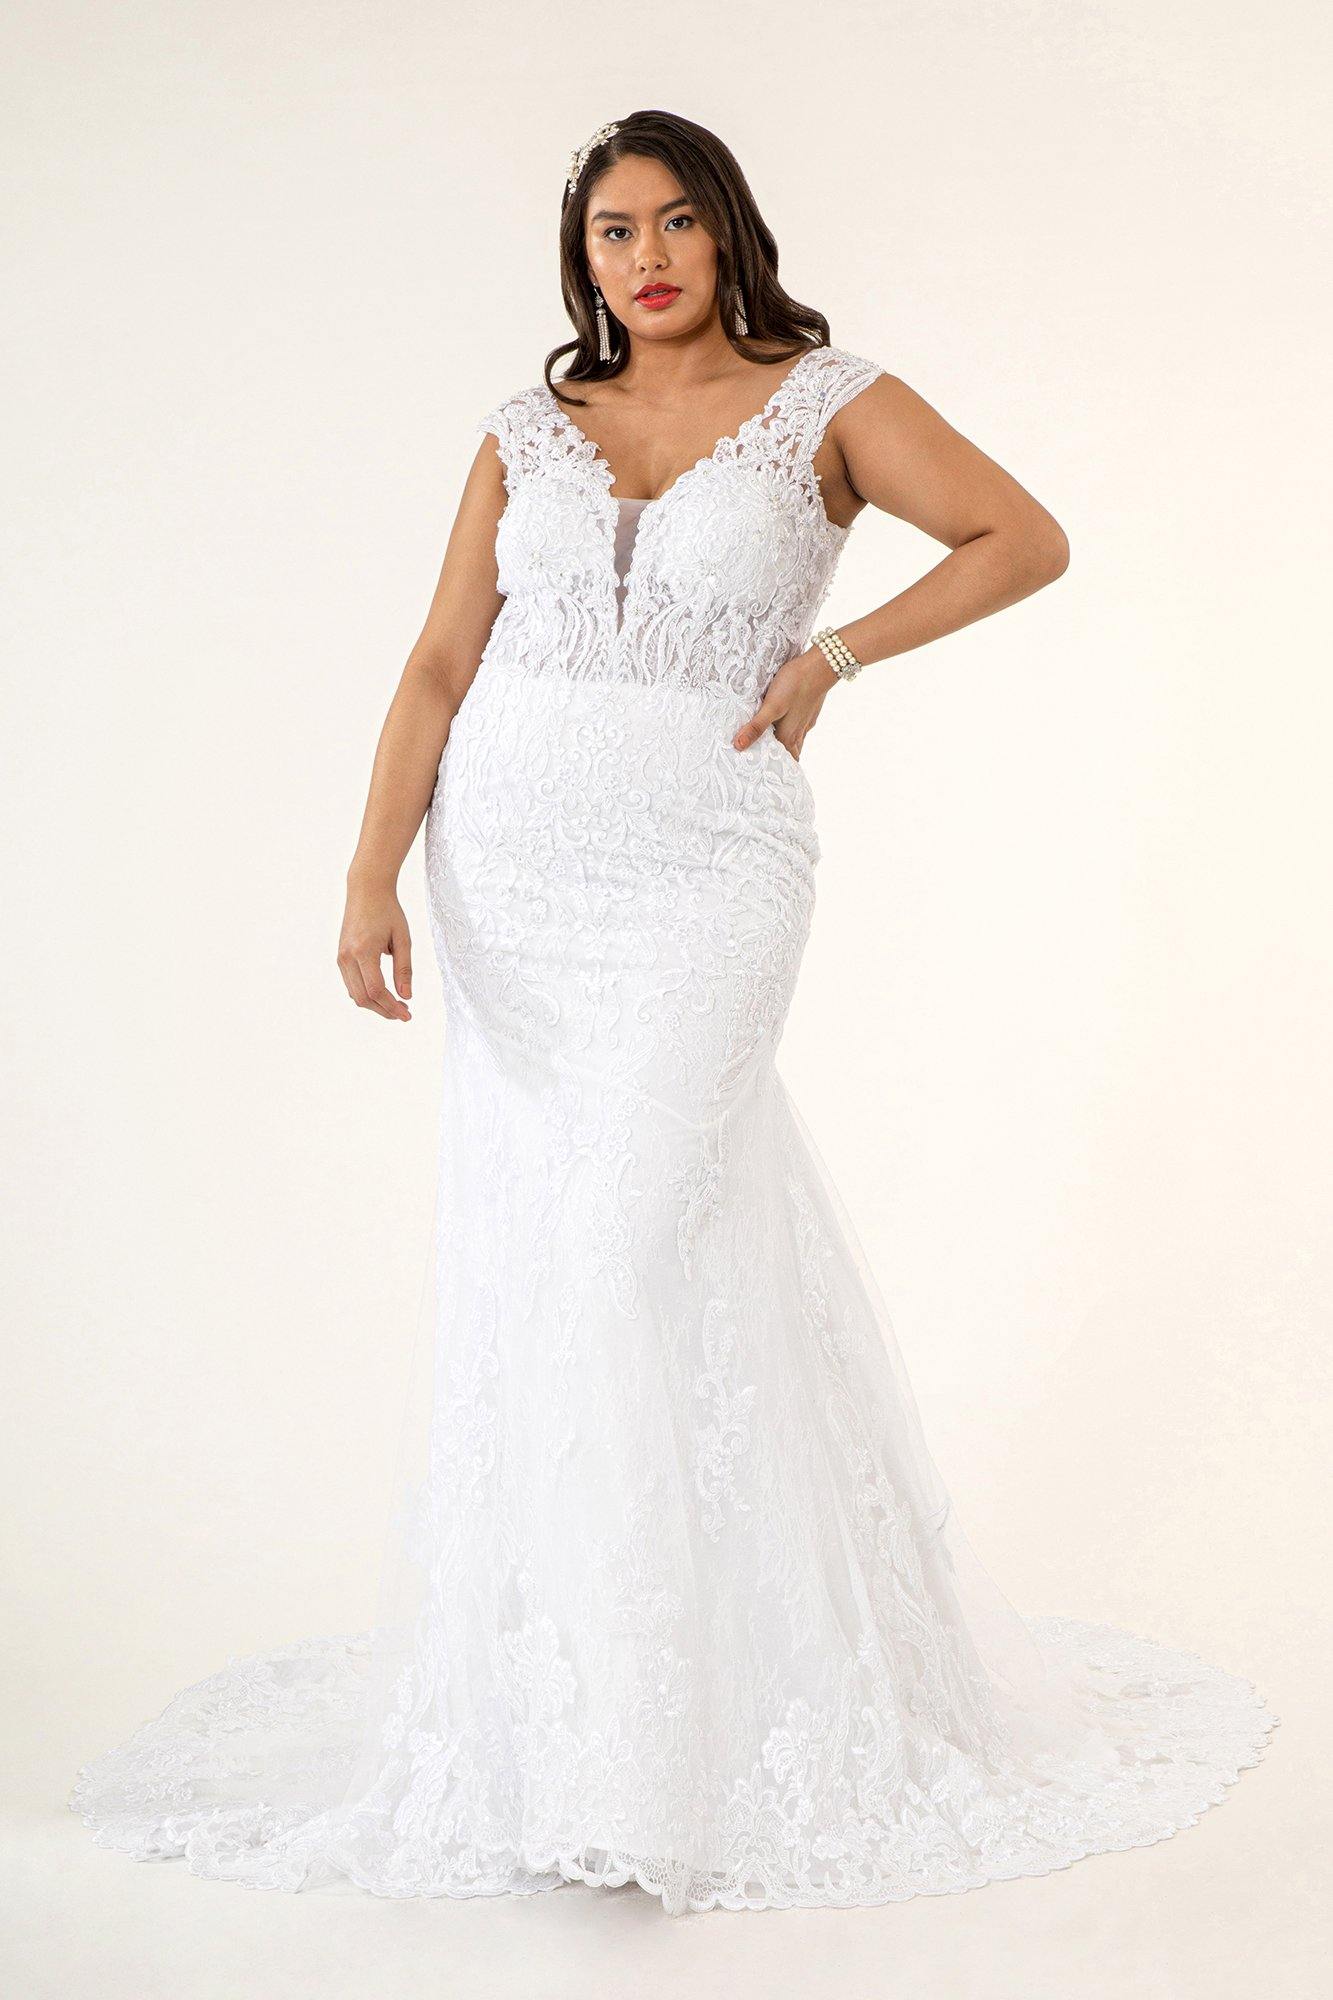 Long Mermaid Tail Lace Wedding Gown - The Dress Outlet